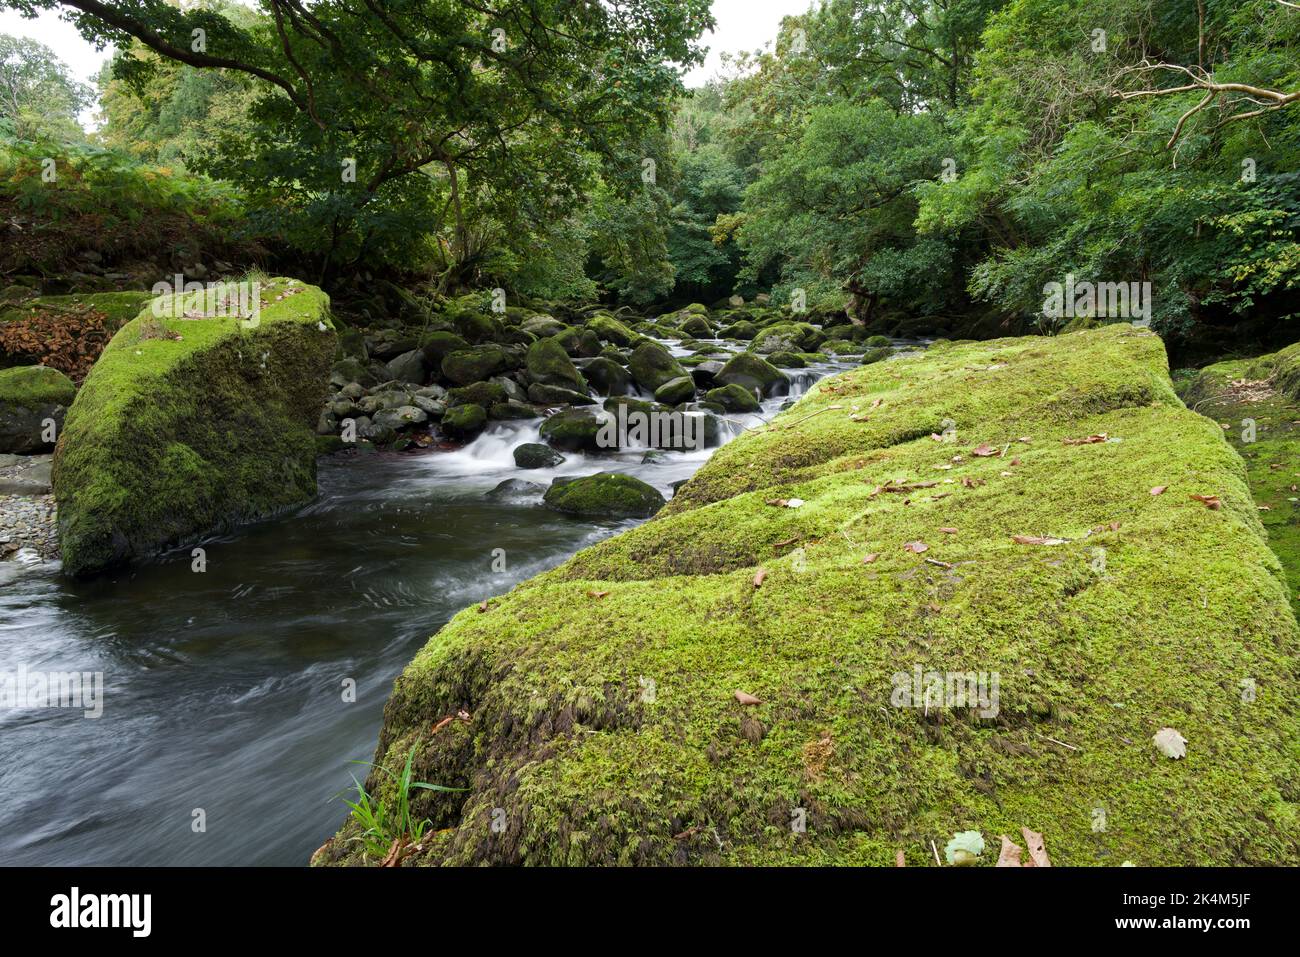 The River Ogwen runs through northern Snowdonia into the Menai Strait. Here it is seen in a wooded valley near Tregarth. Stock Photo